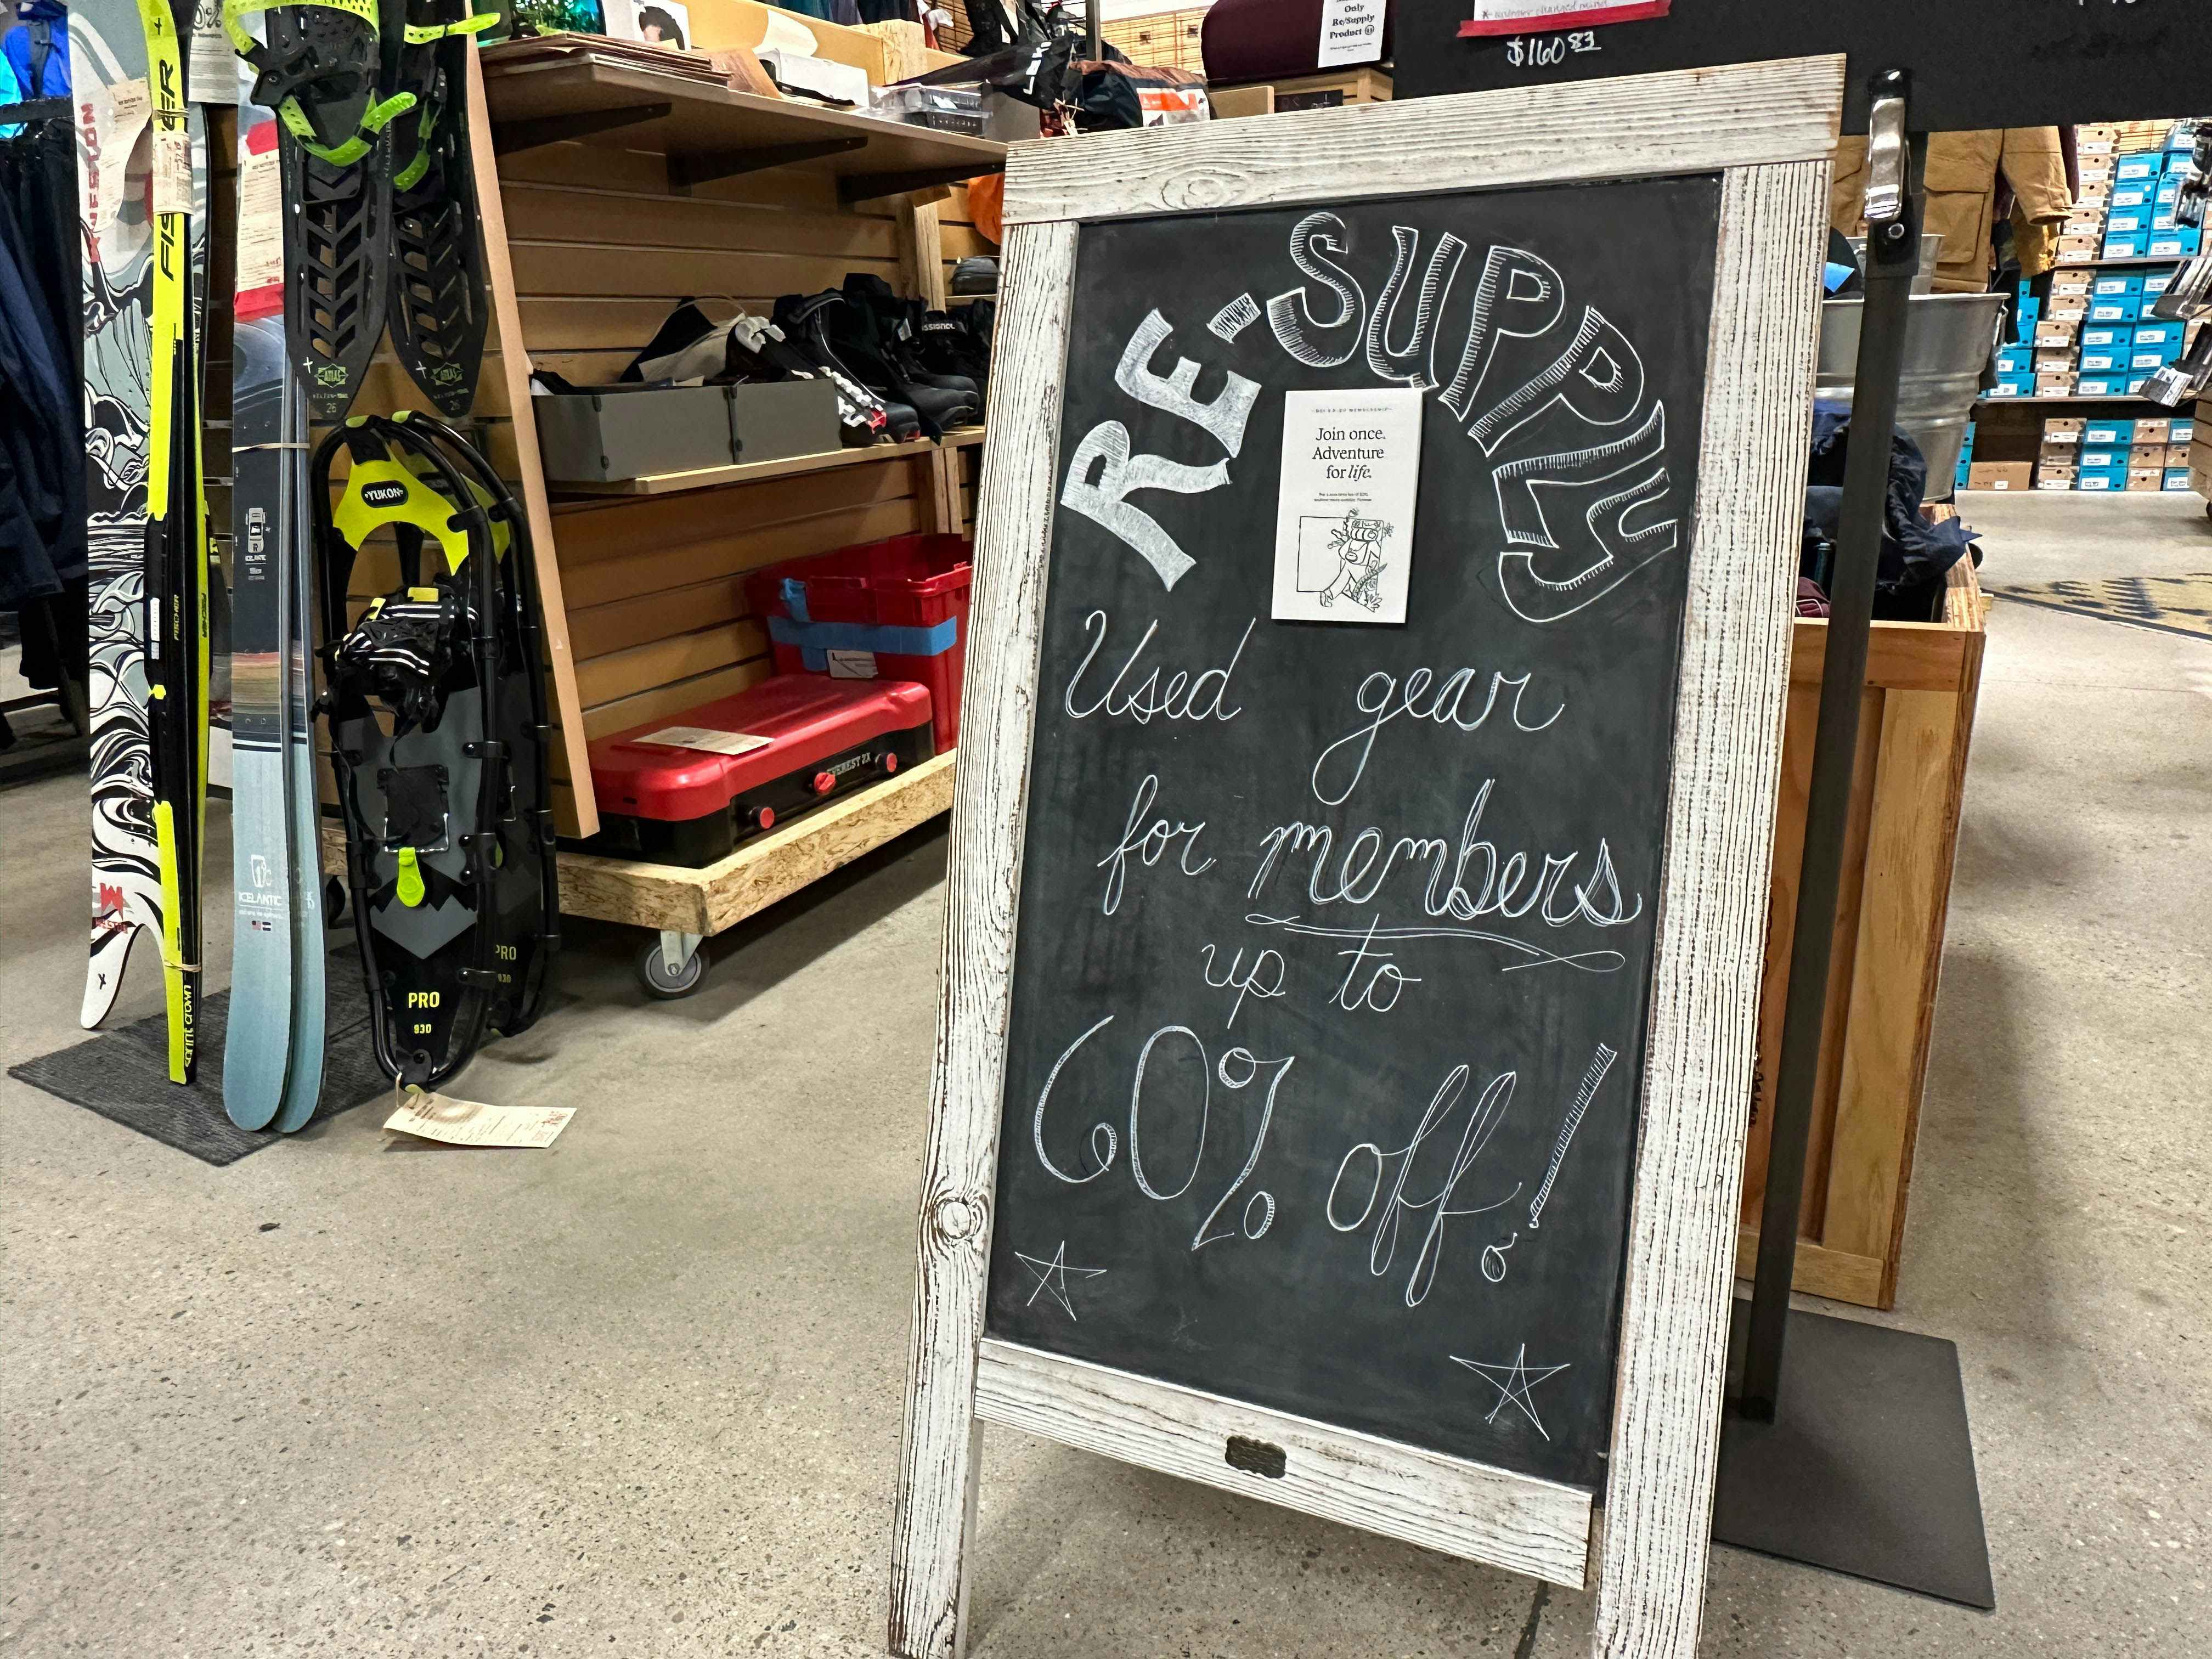 re supply used gear area and signage in rei 